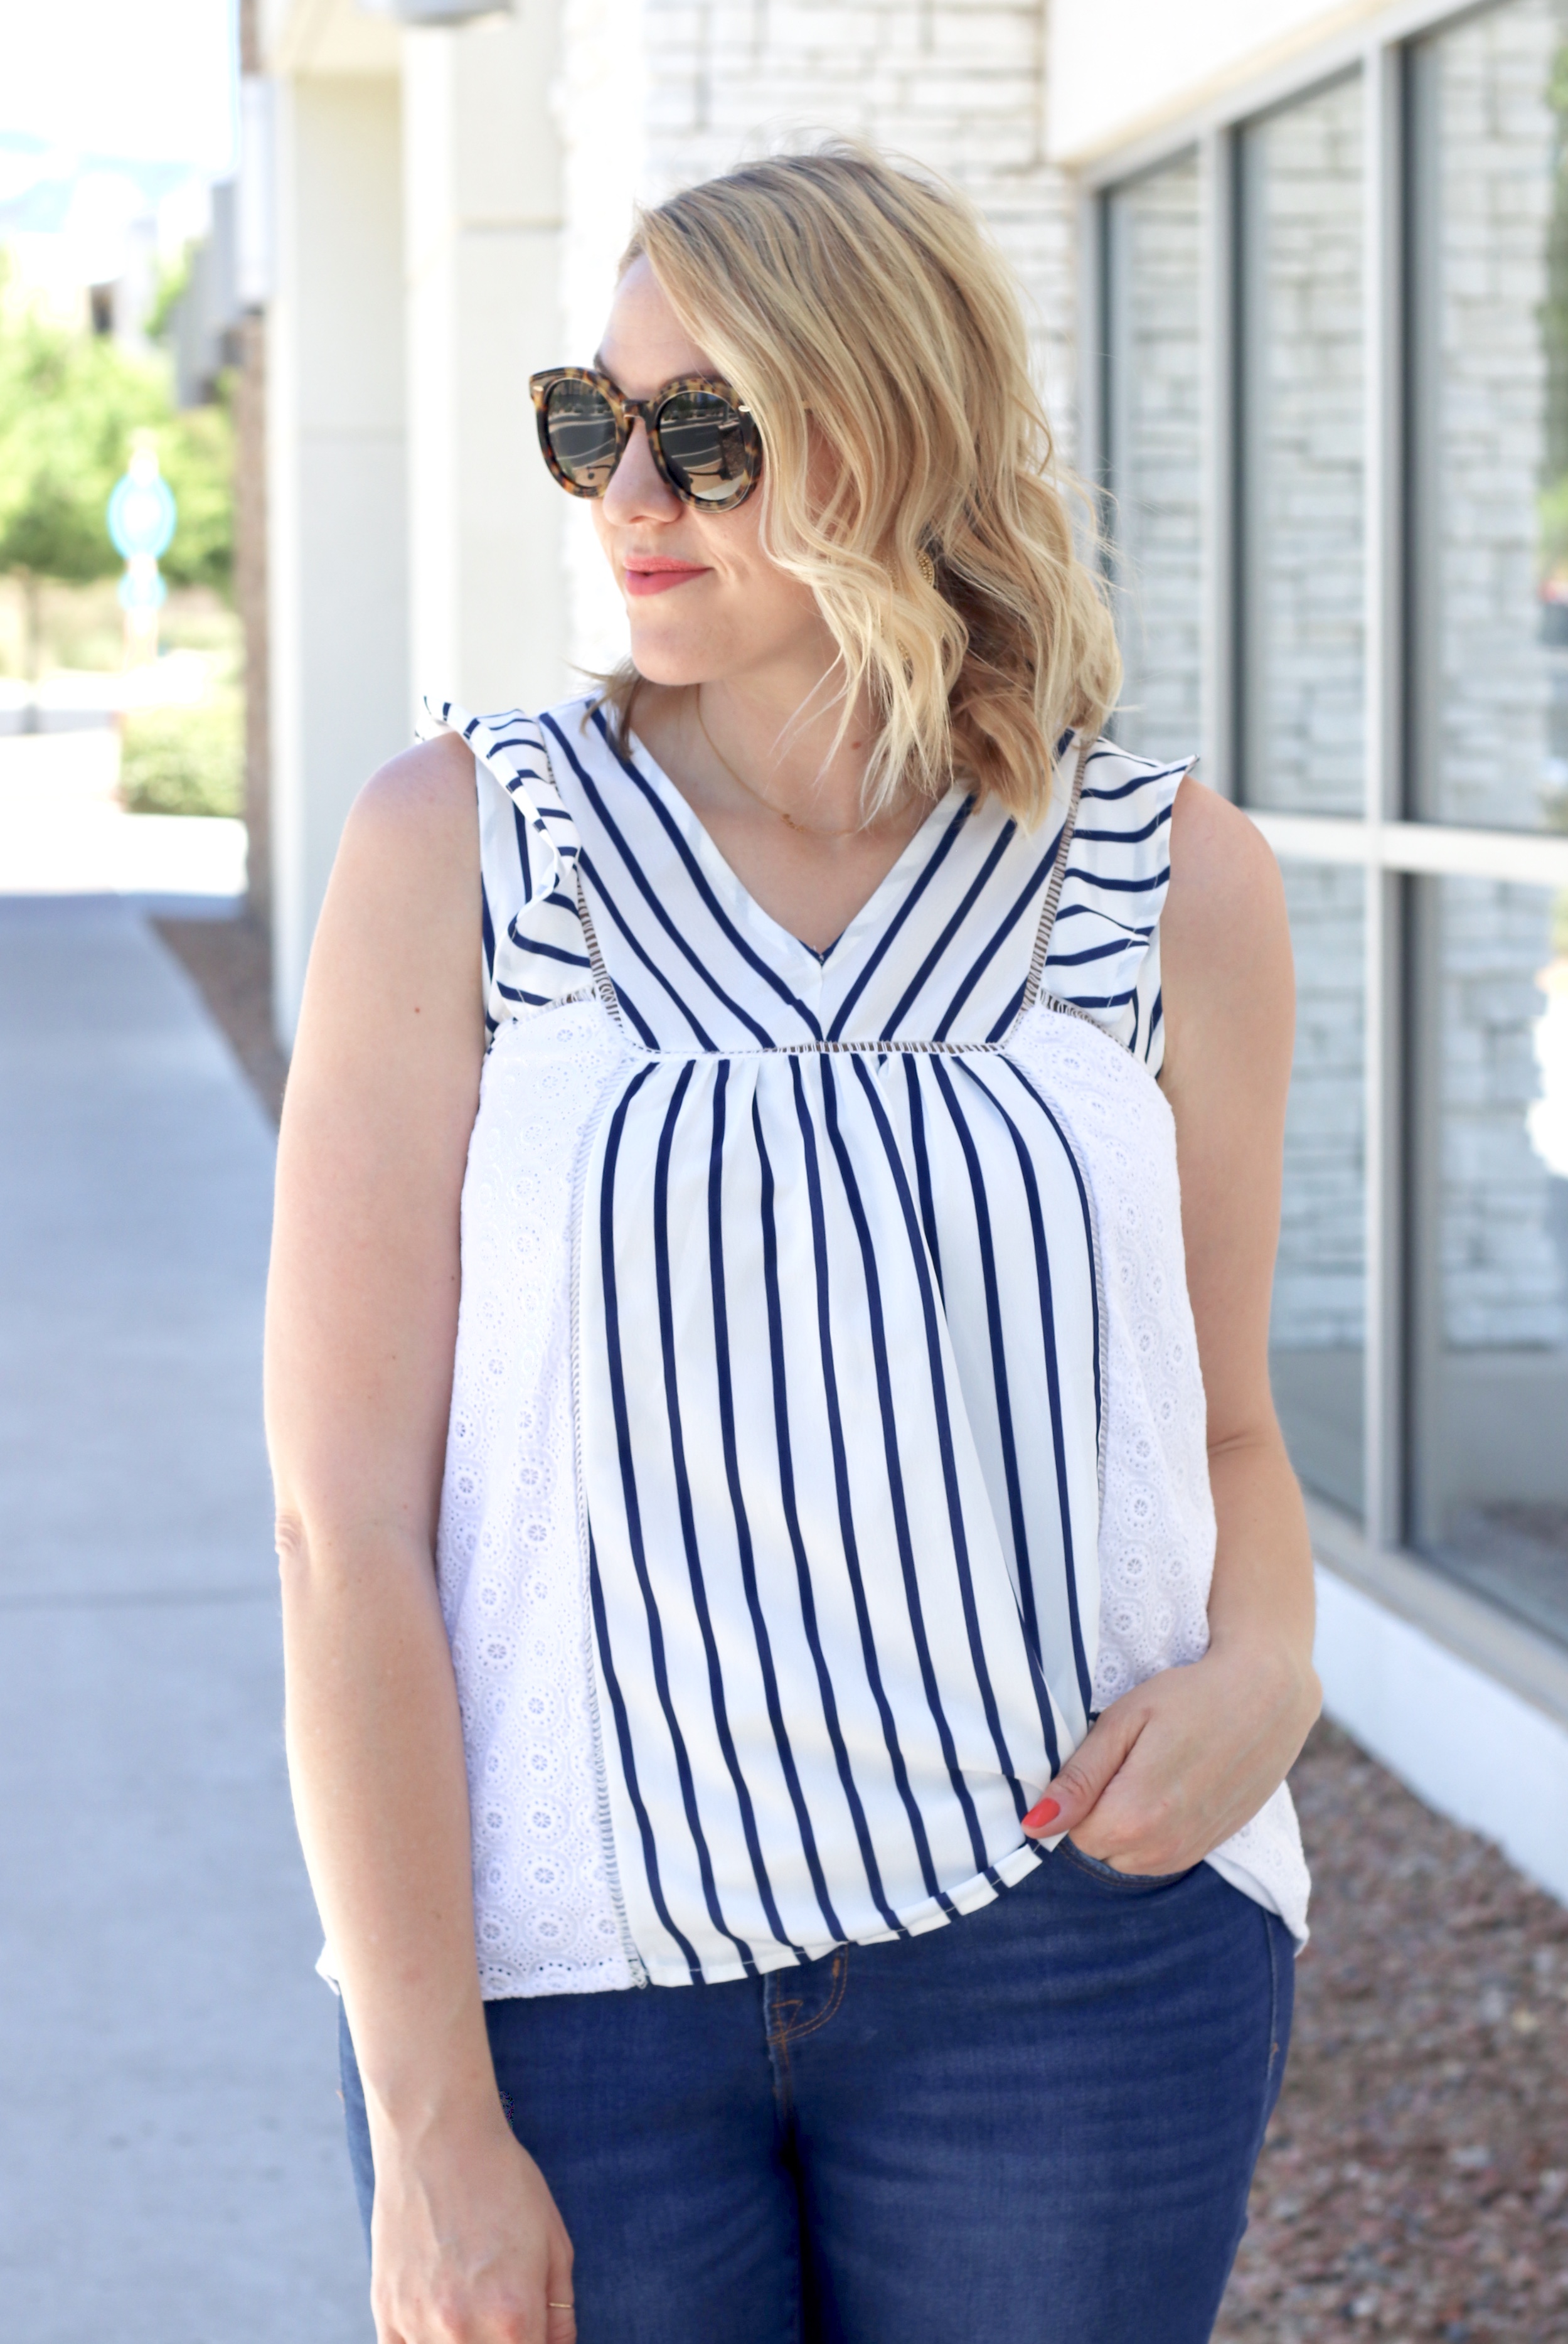 eyelet blouse with striped miss match san diego #missmatchsd #eyeletblouse #eyelet #stripedtop